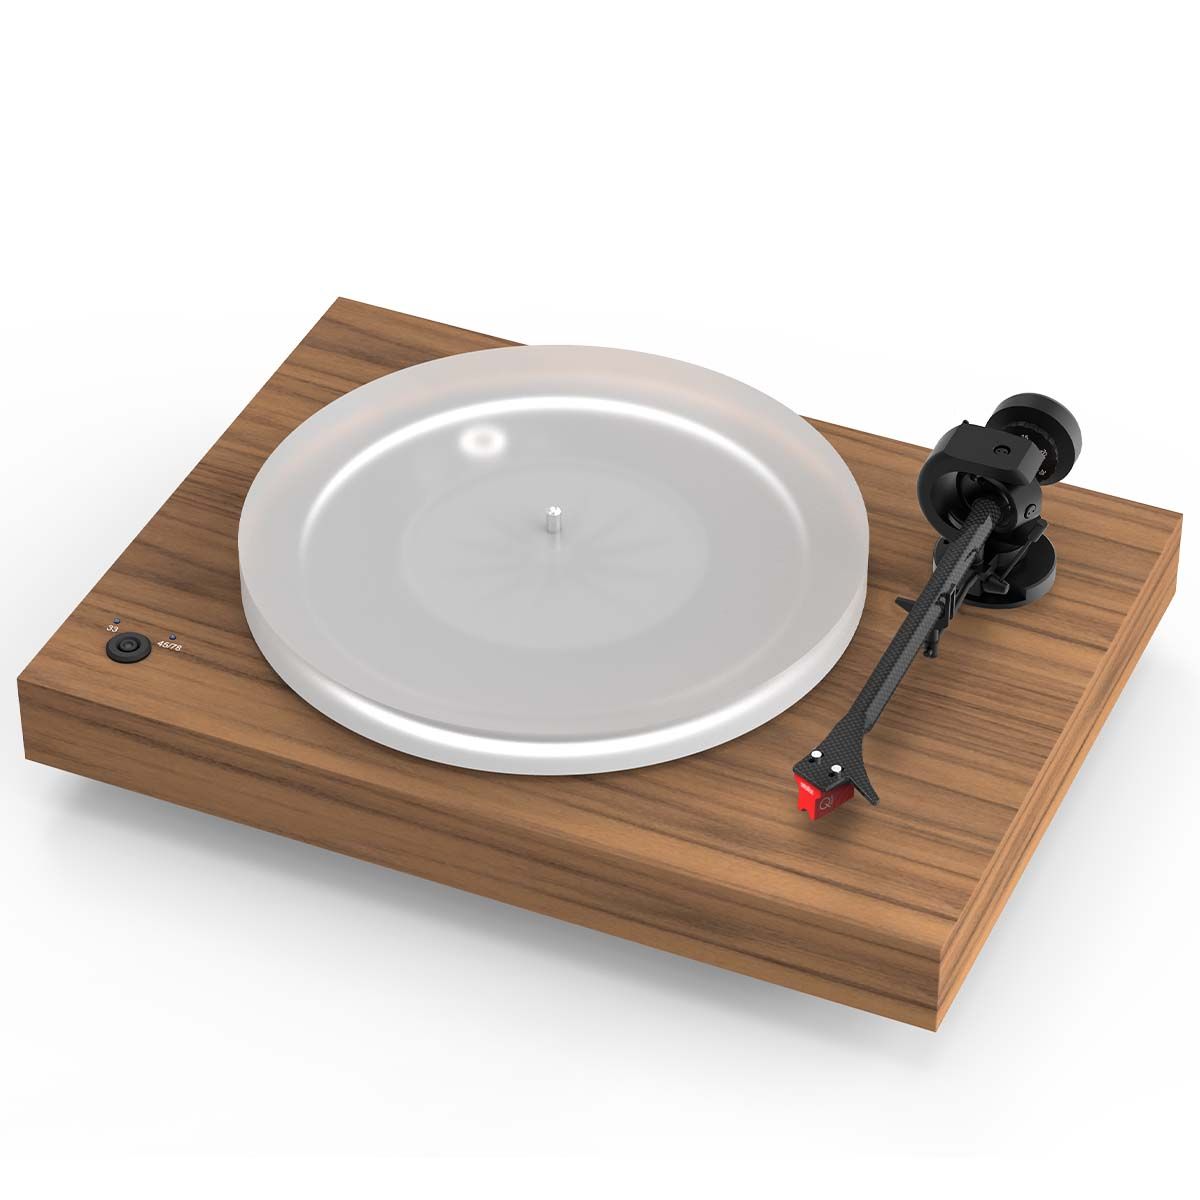 Pro-Ject X2B True Balanced Turntable - angled front view of walnut